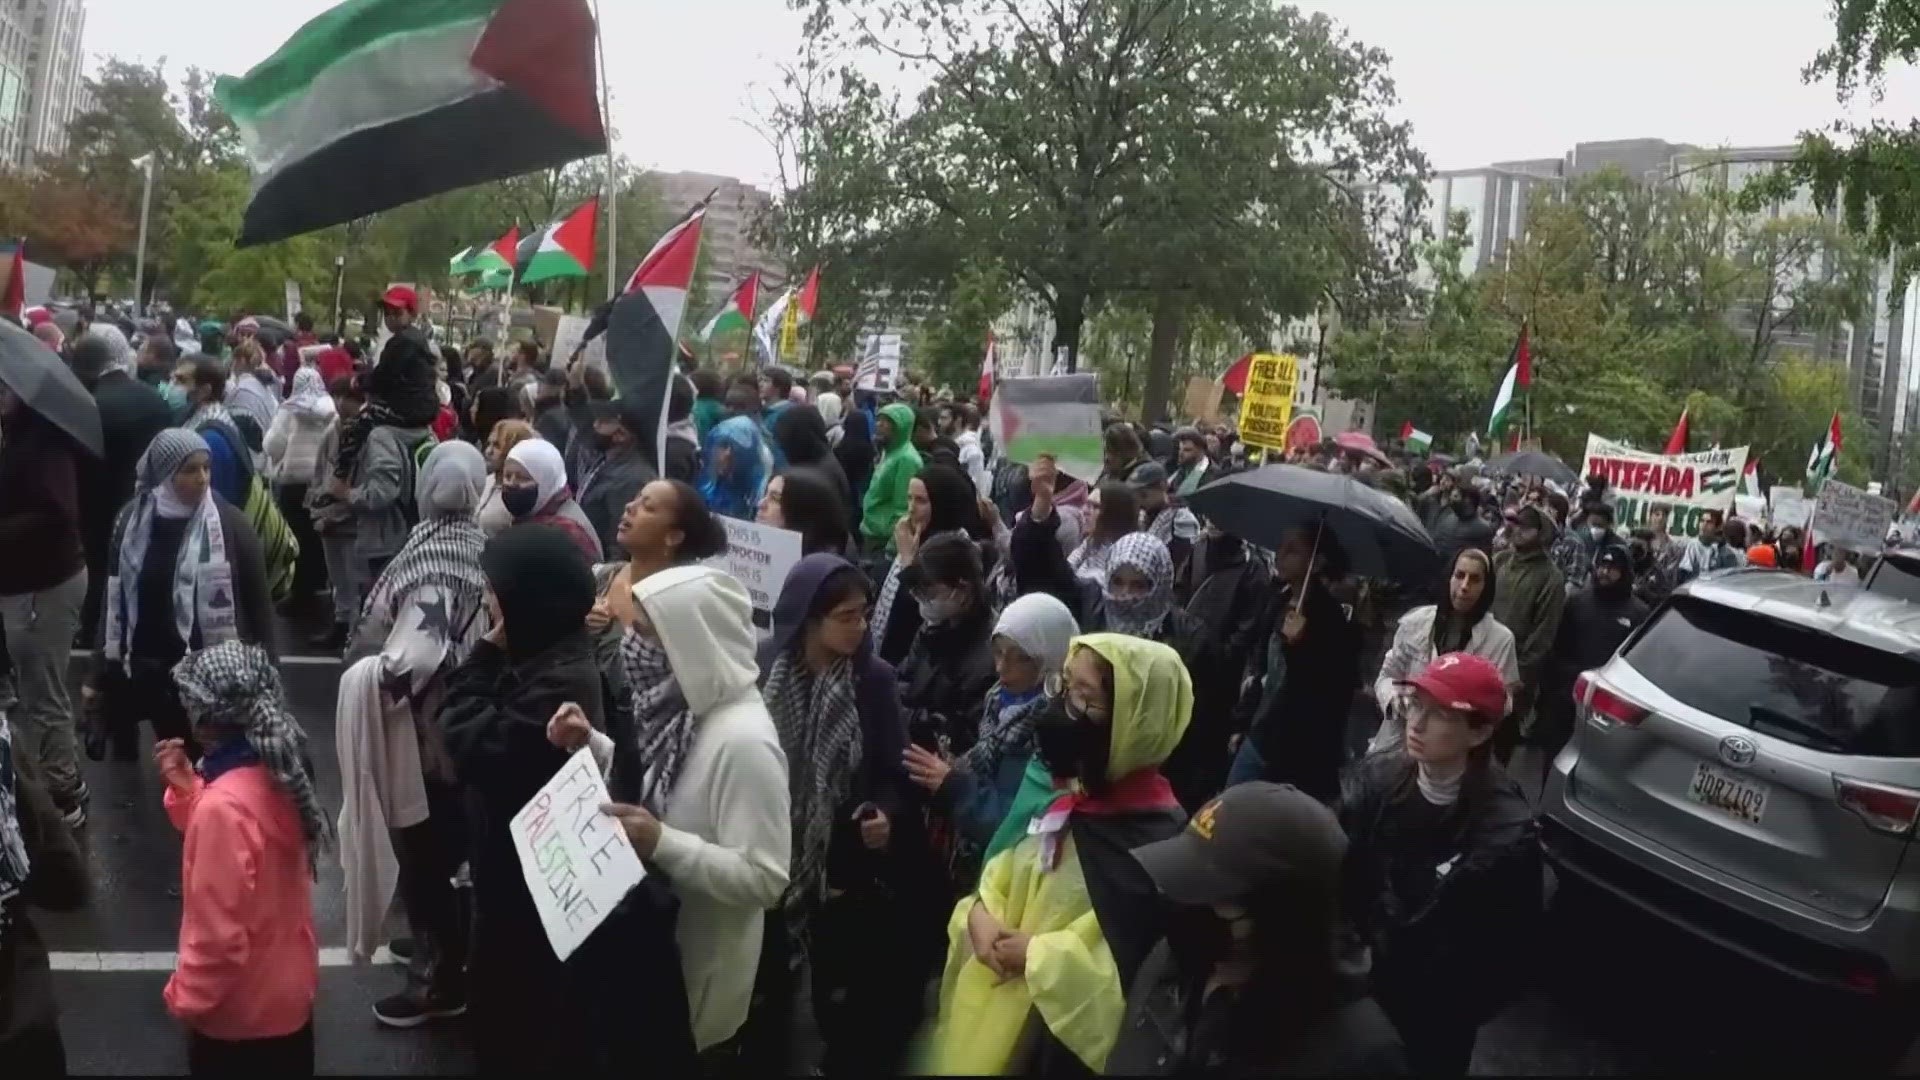 The nonprofit group, American Muslims for Palestine, calling for peace in Gaza by marching at a protest on Saturday afternoon at the White House.